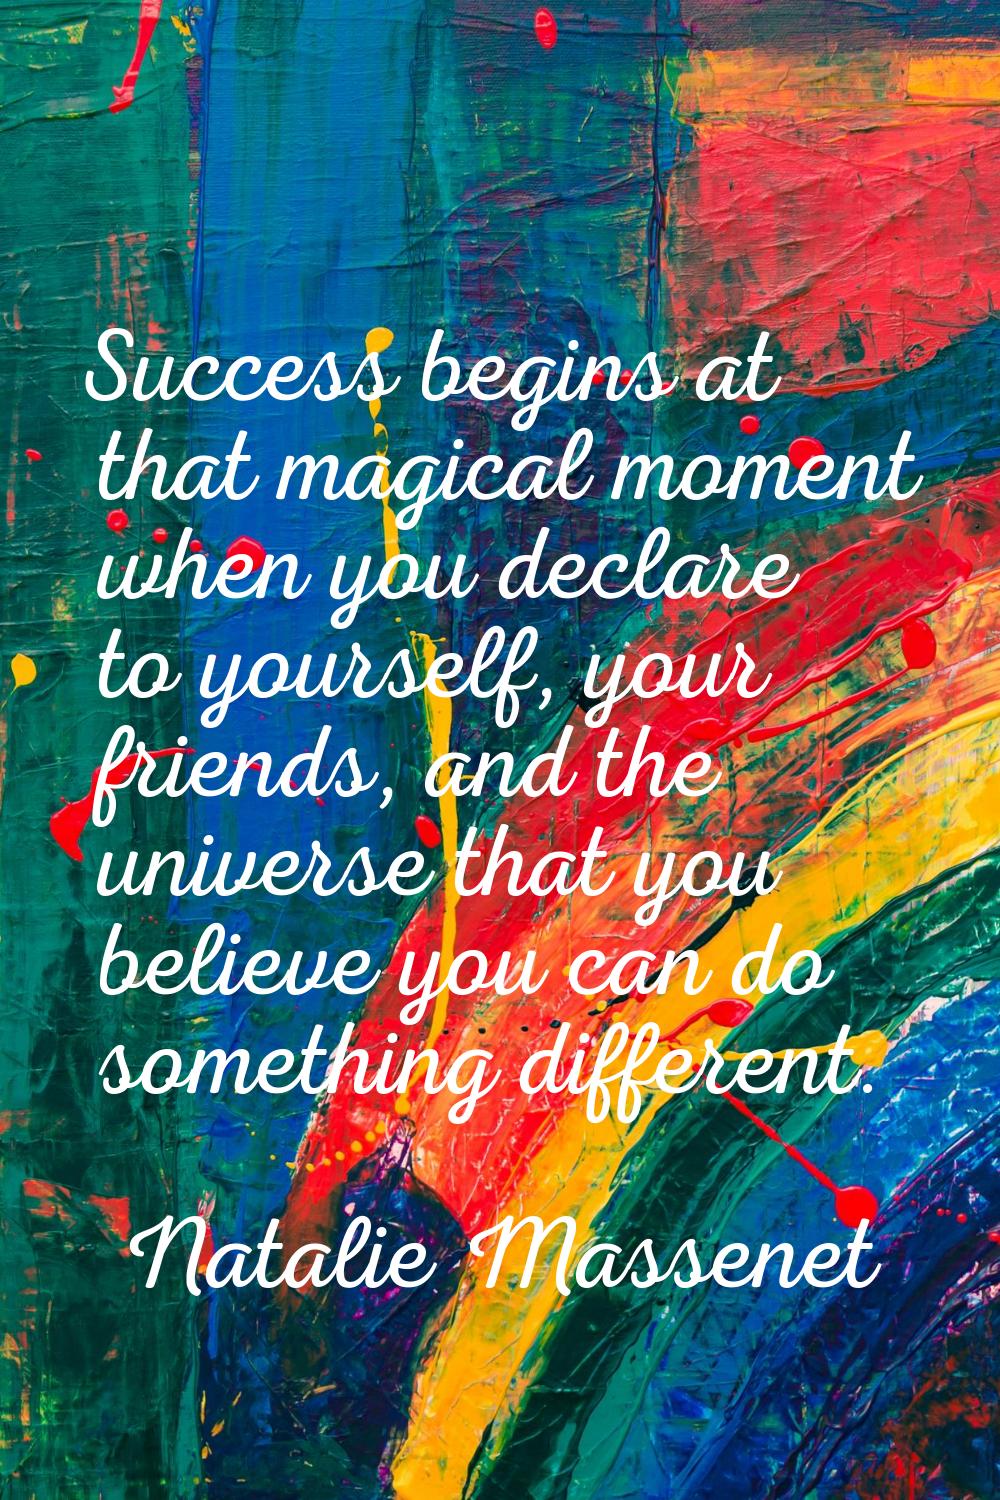 Success begins at that magical moment when you declare to yourself, your friends, and the universe 